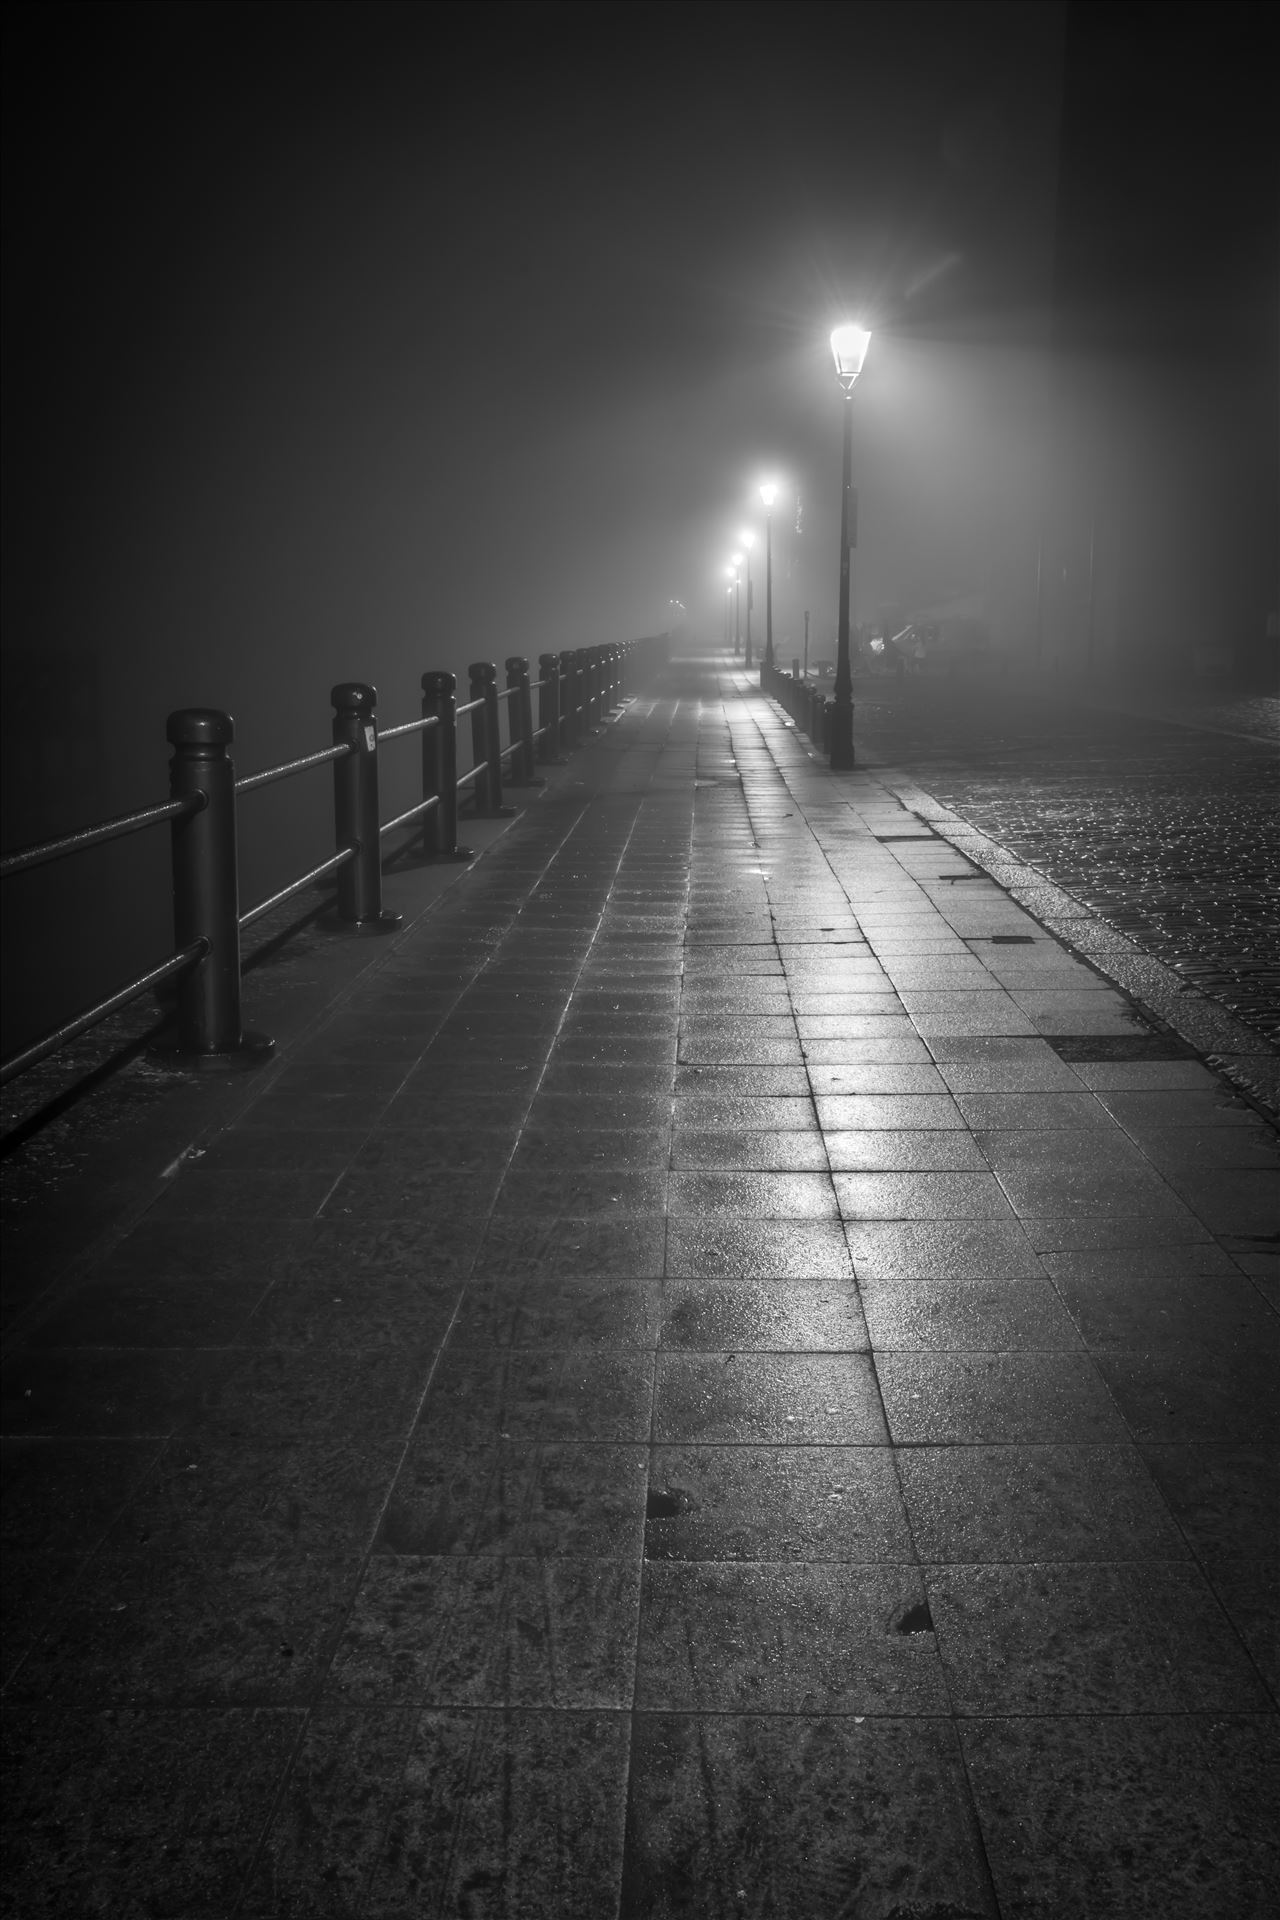 Fog on the Tyne 1 - Shot on the quayside at Newcastle early one foggy morning by philreay